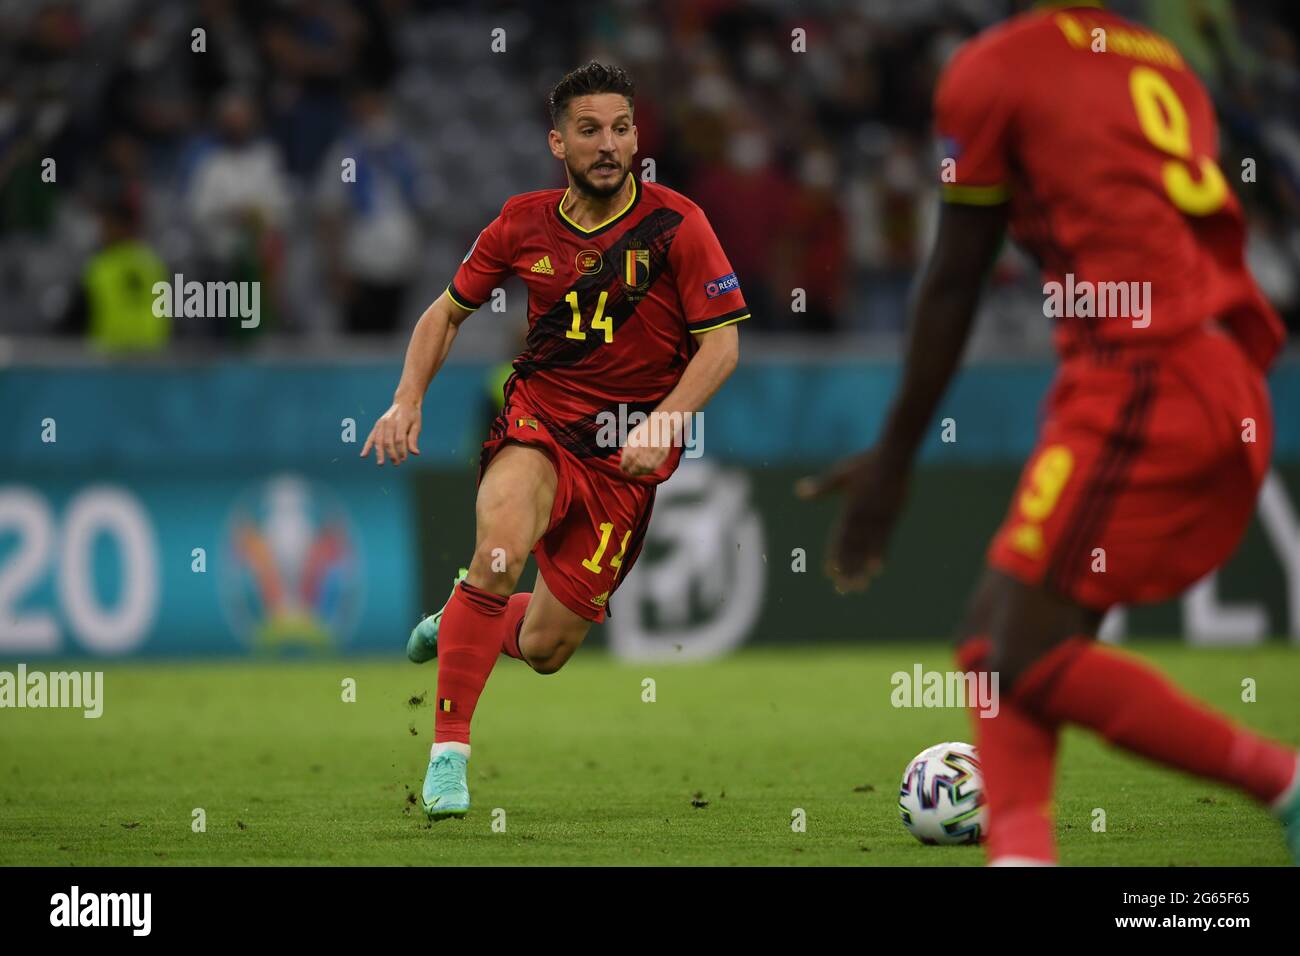 Munchen, Germany. 2nd July 2021. Dries Mertens (Belgium) during the Uefa 'European Championship 2020 Quarter-finals match between Belgium 1-2 Italy at Allianz Arena on July 02, 2021 in Munchen, Germany. Credit: Maurizio Borsari/AFLO/Alamy Live News Stock Photo